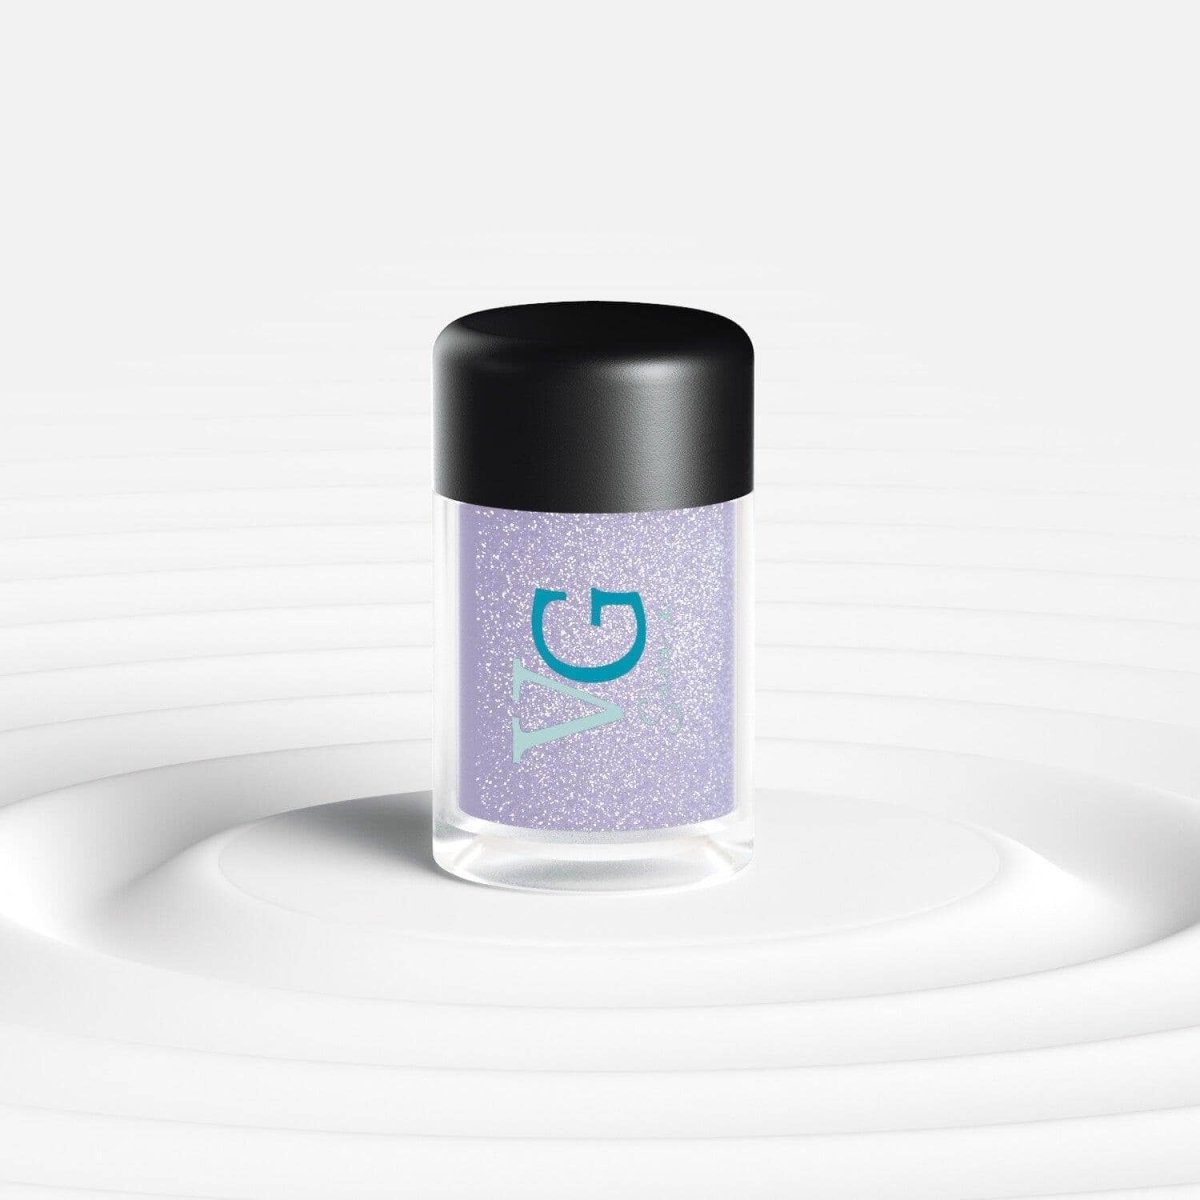 A white bottle of Cruelty-Free Mineral Stardust Glitter with a minimalist design